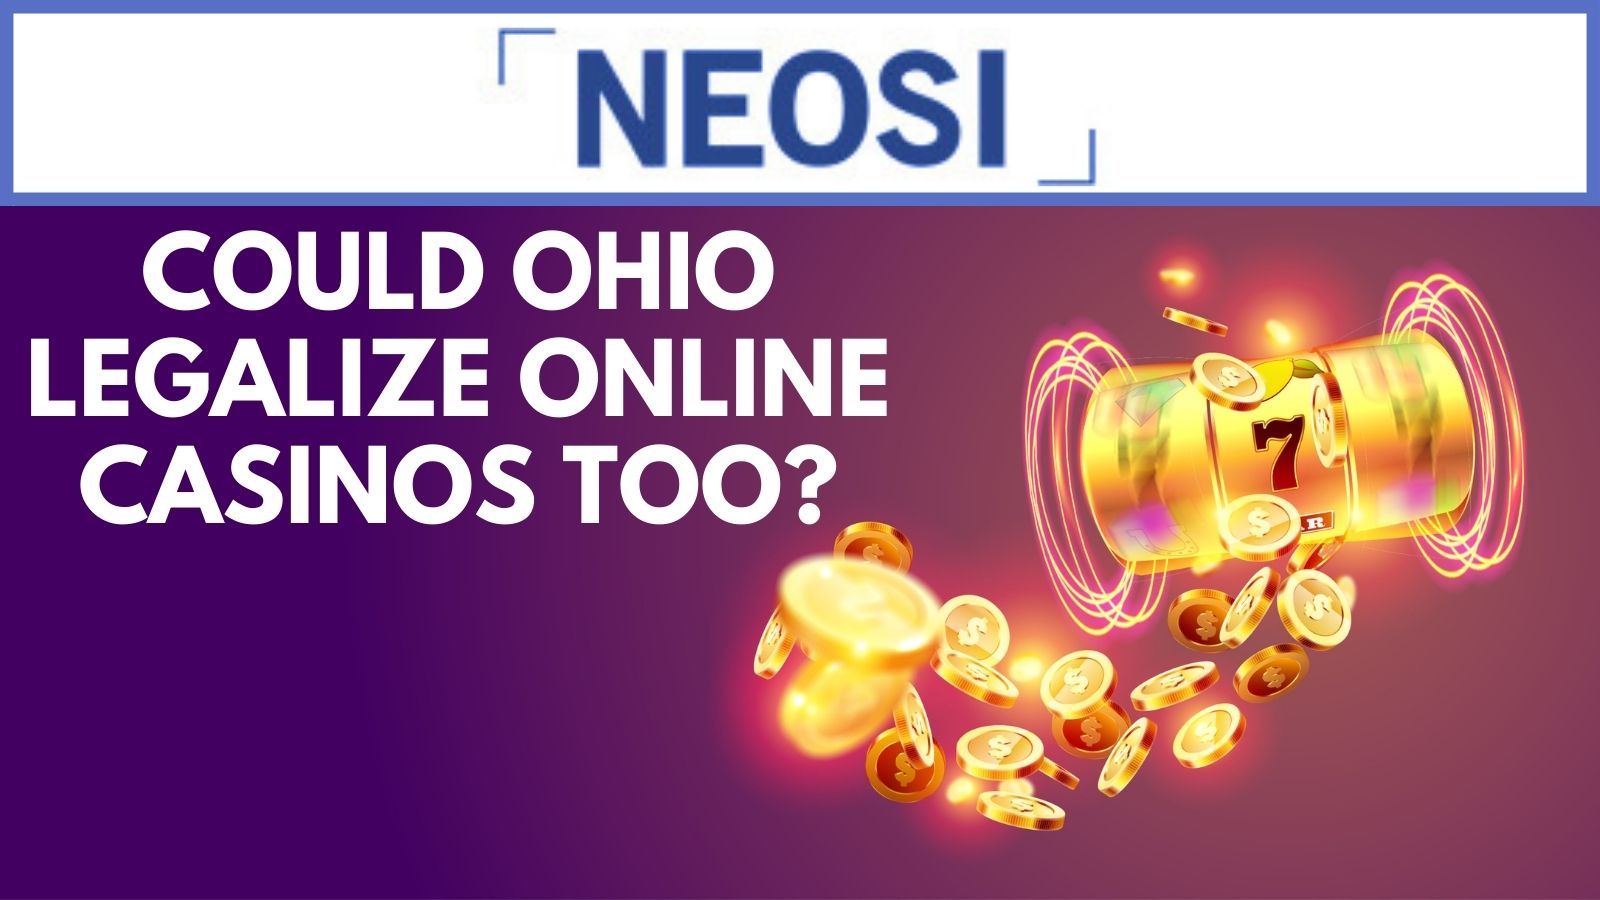 Could Ohio Legalize Online Casinos Too?